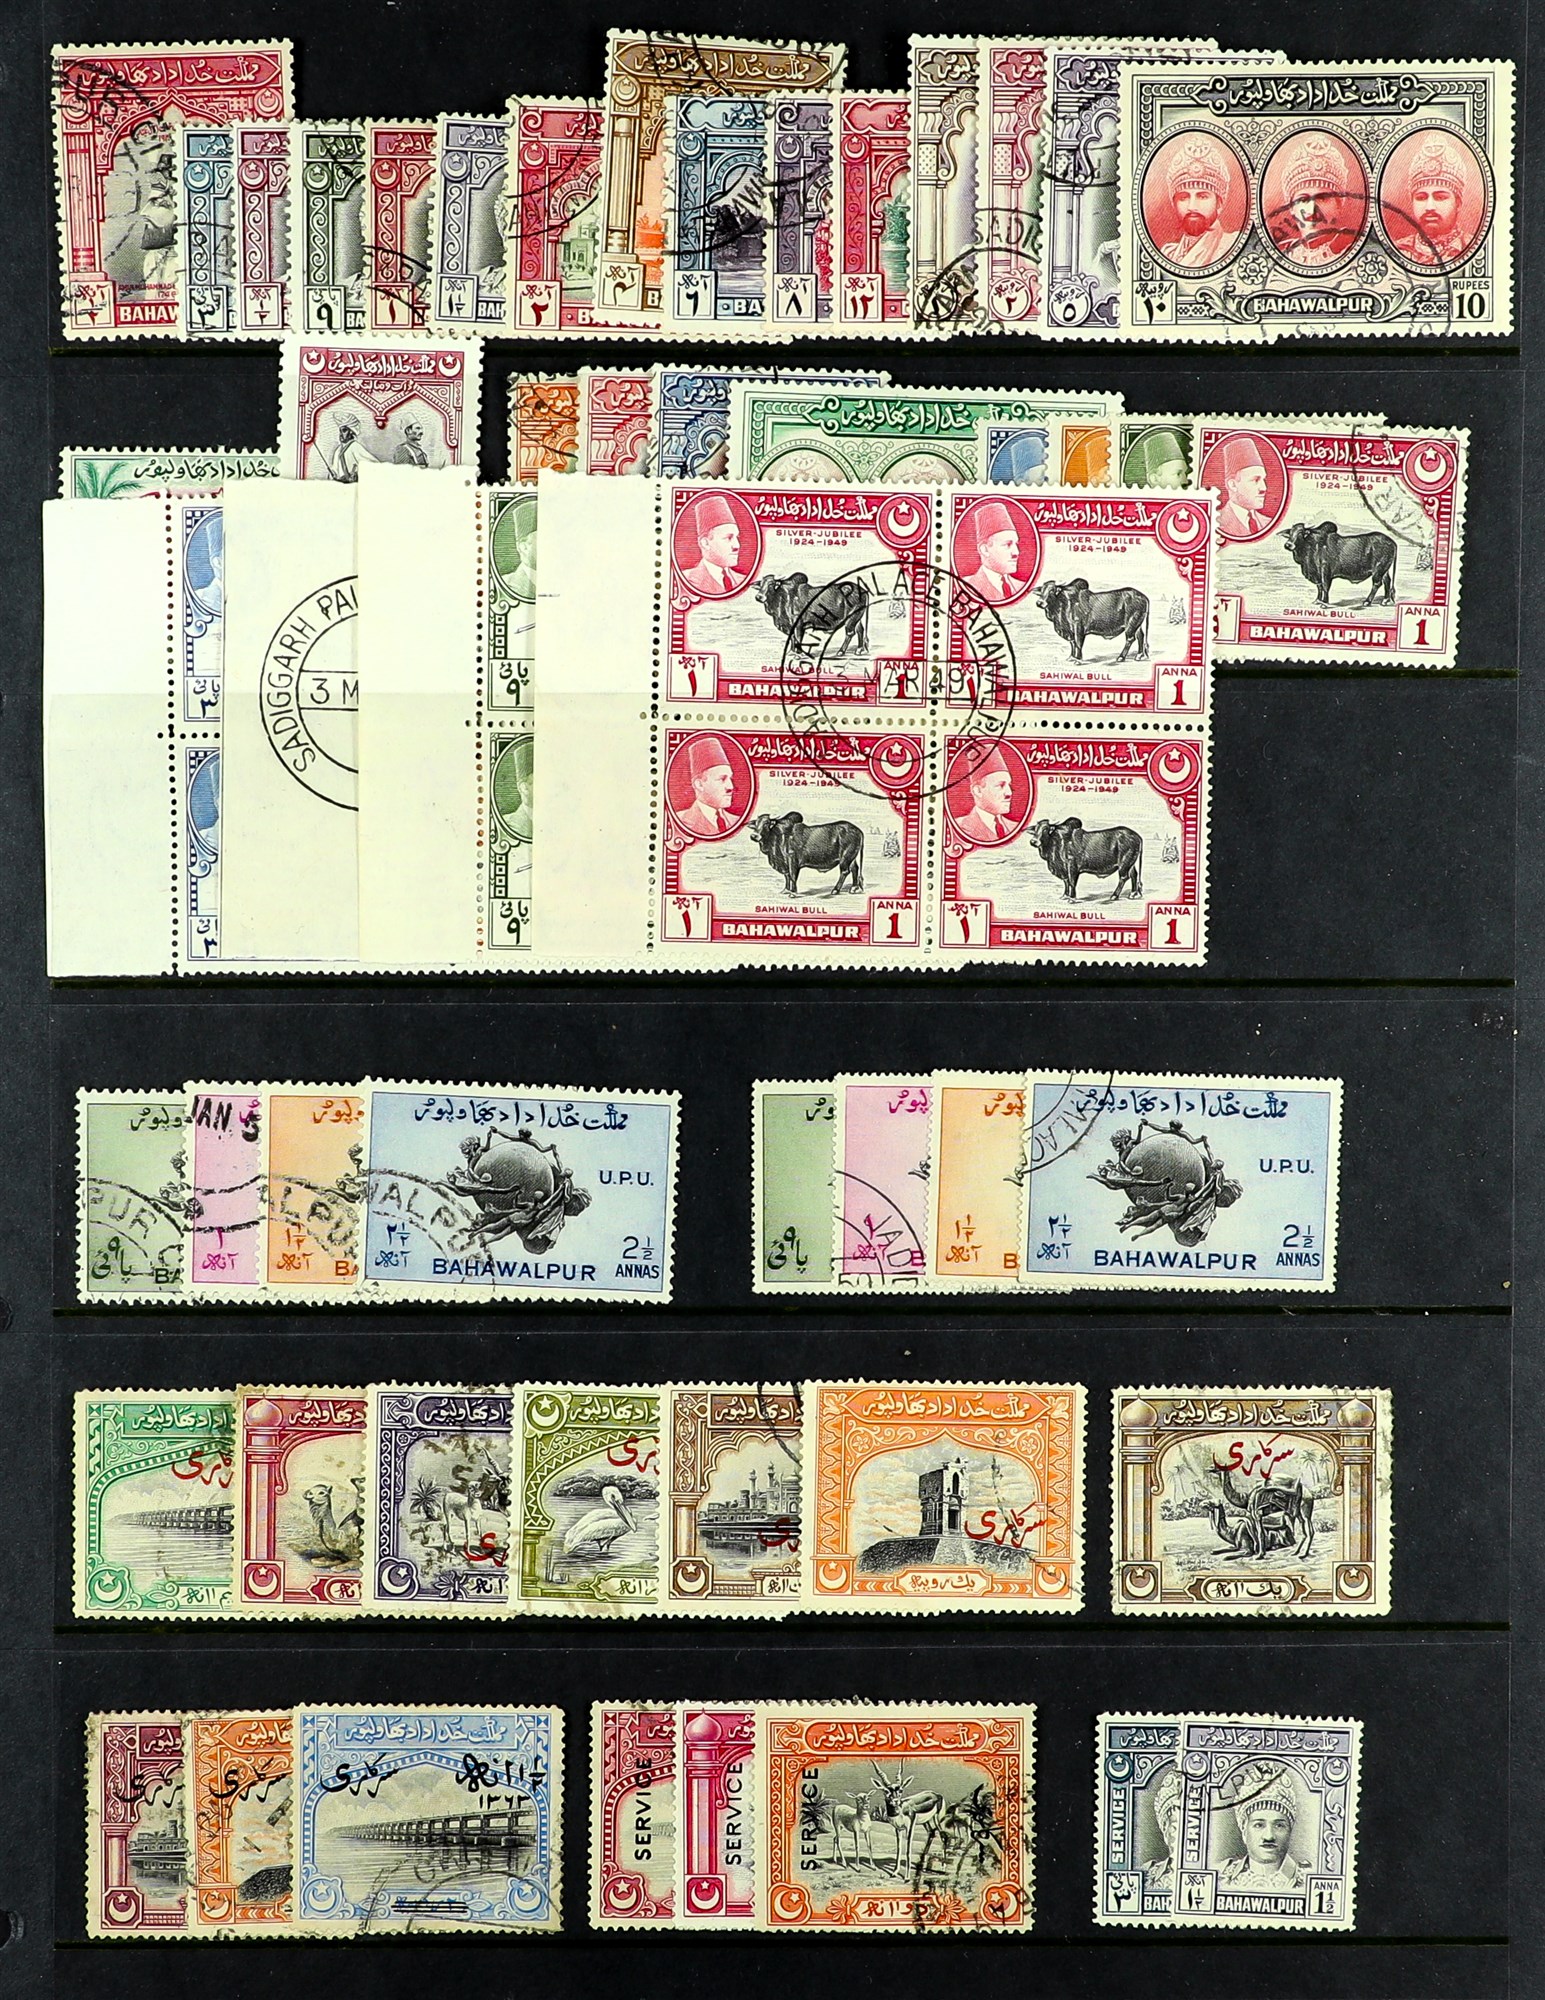 PAKISTAN - BAHAWALPUR 1947 - 1949 USED COLLECTION on protective pages with the Postage issues